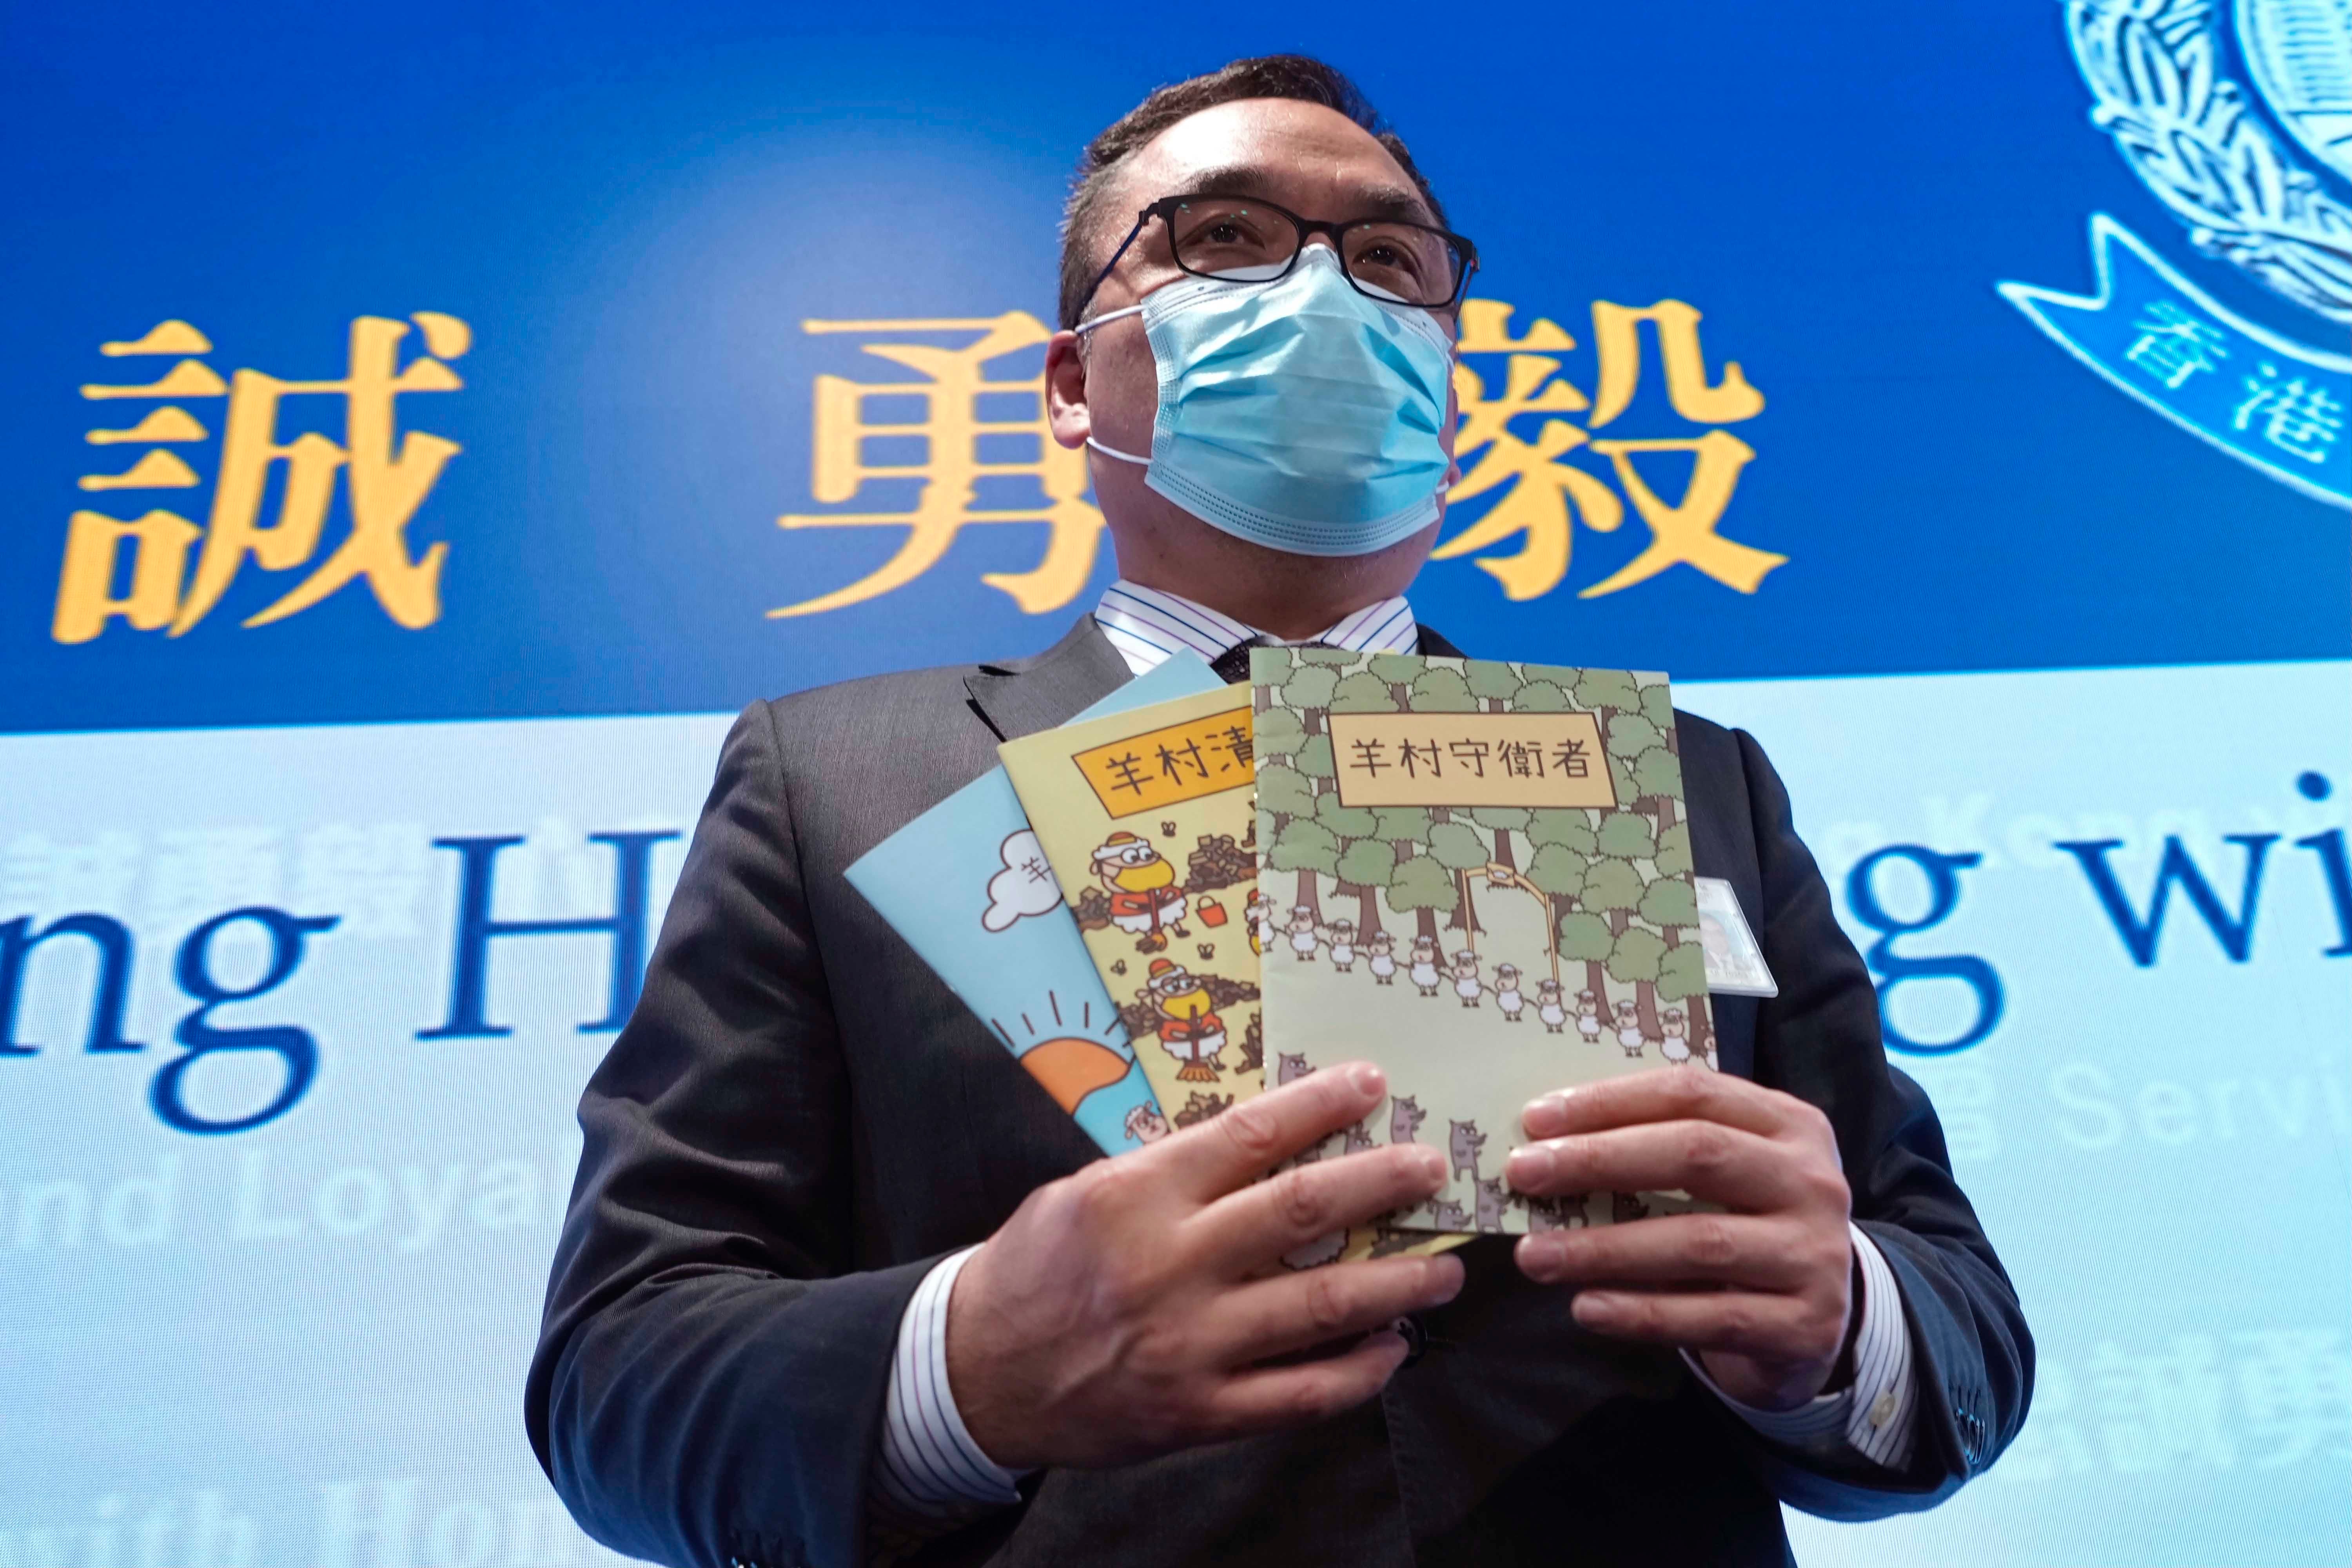 Li Kwai-wah, senior superintendent of Police National Security Department, poses with the children's book series Sheep Village at a press conference in Hong Kong, July 22, 2021.